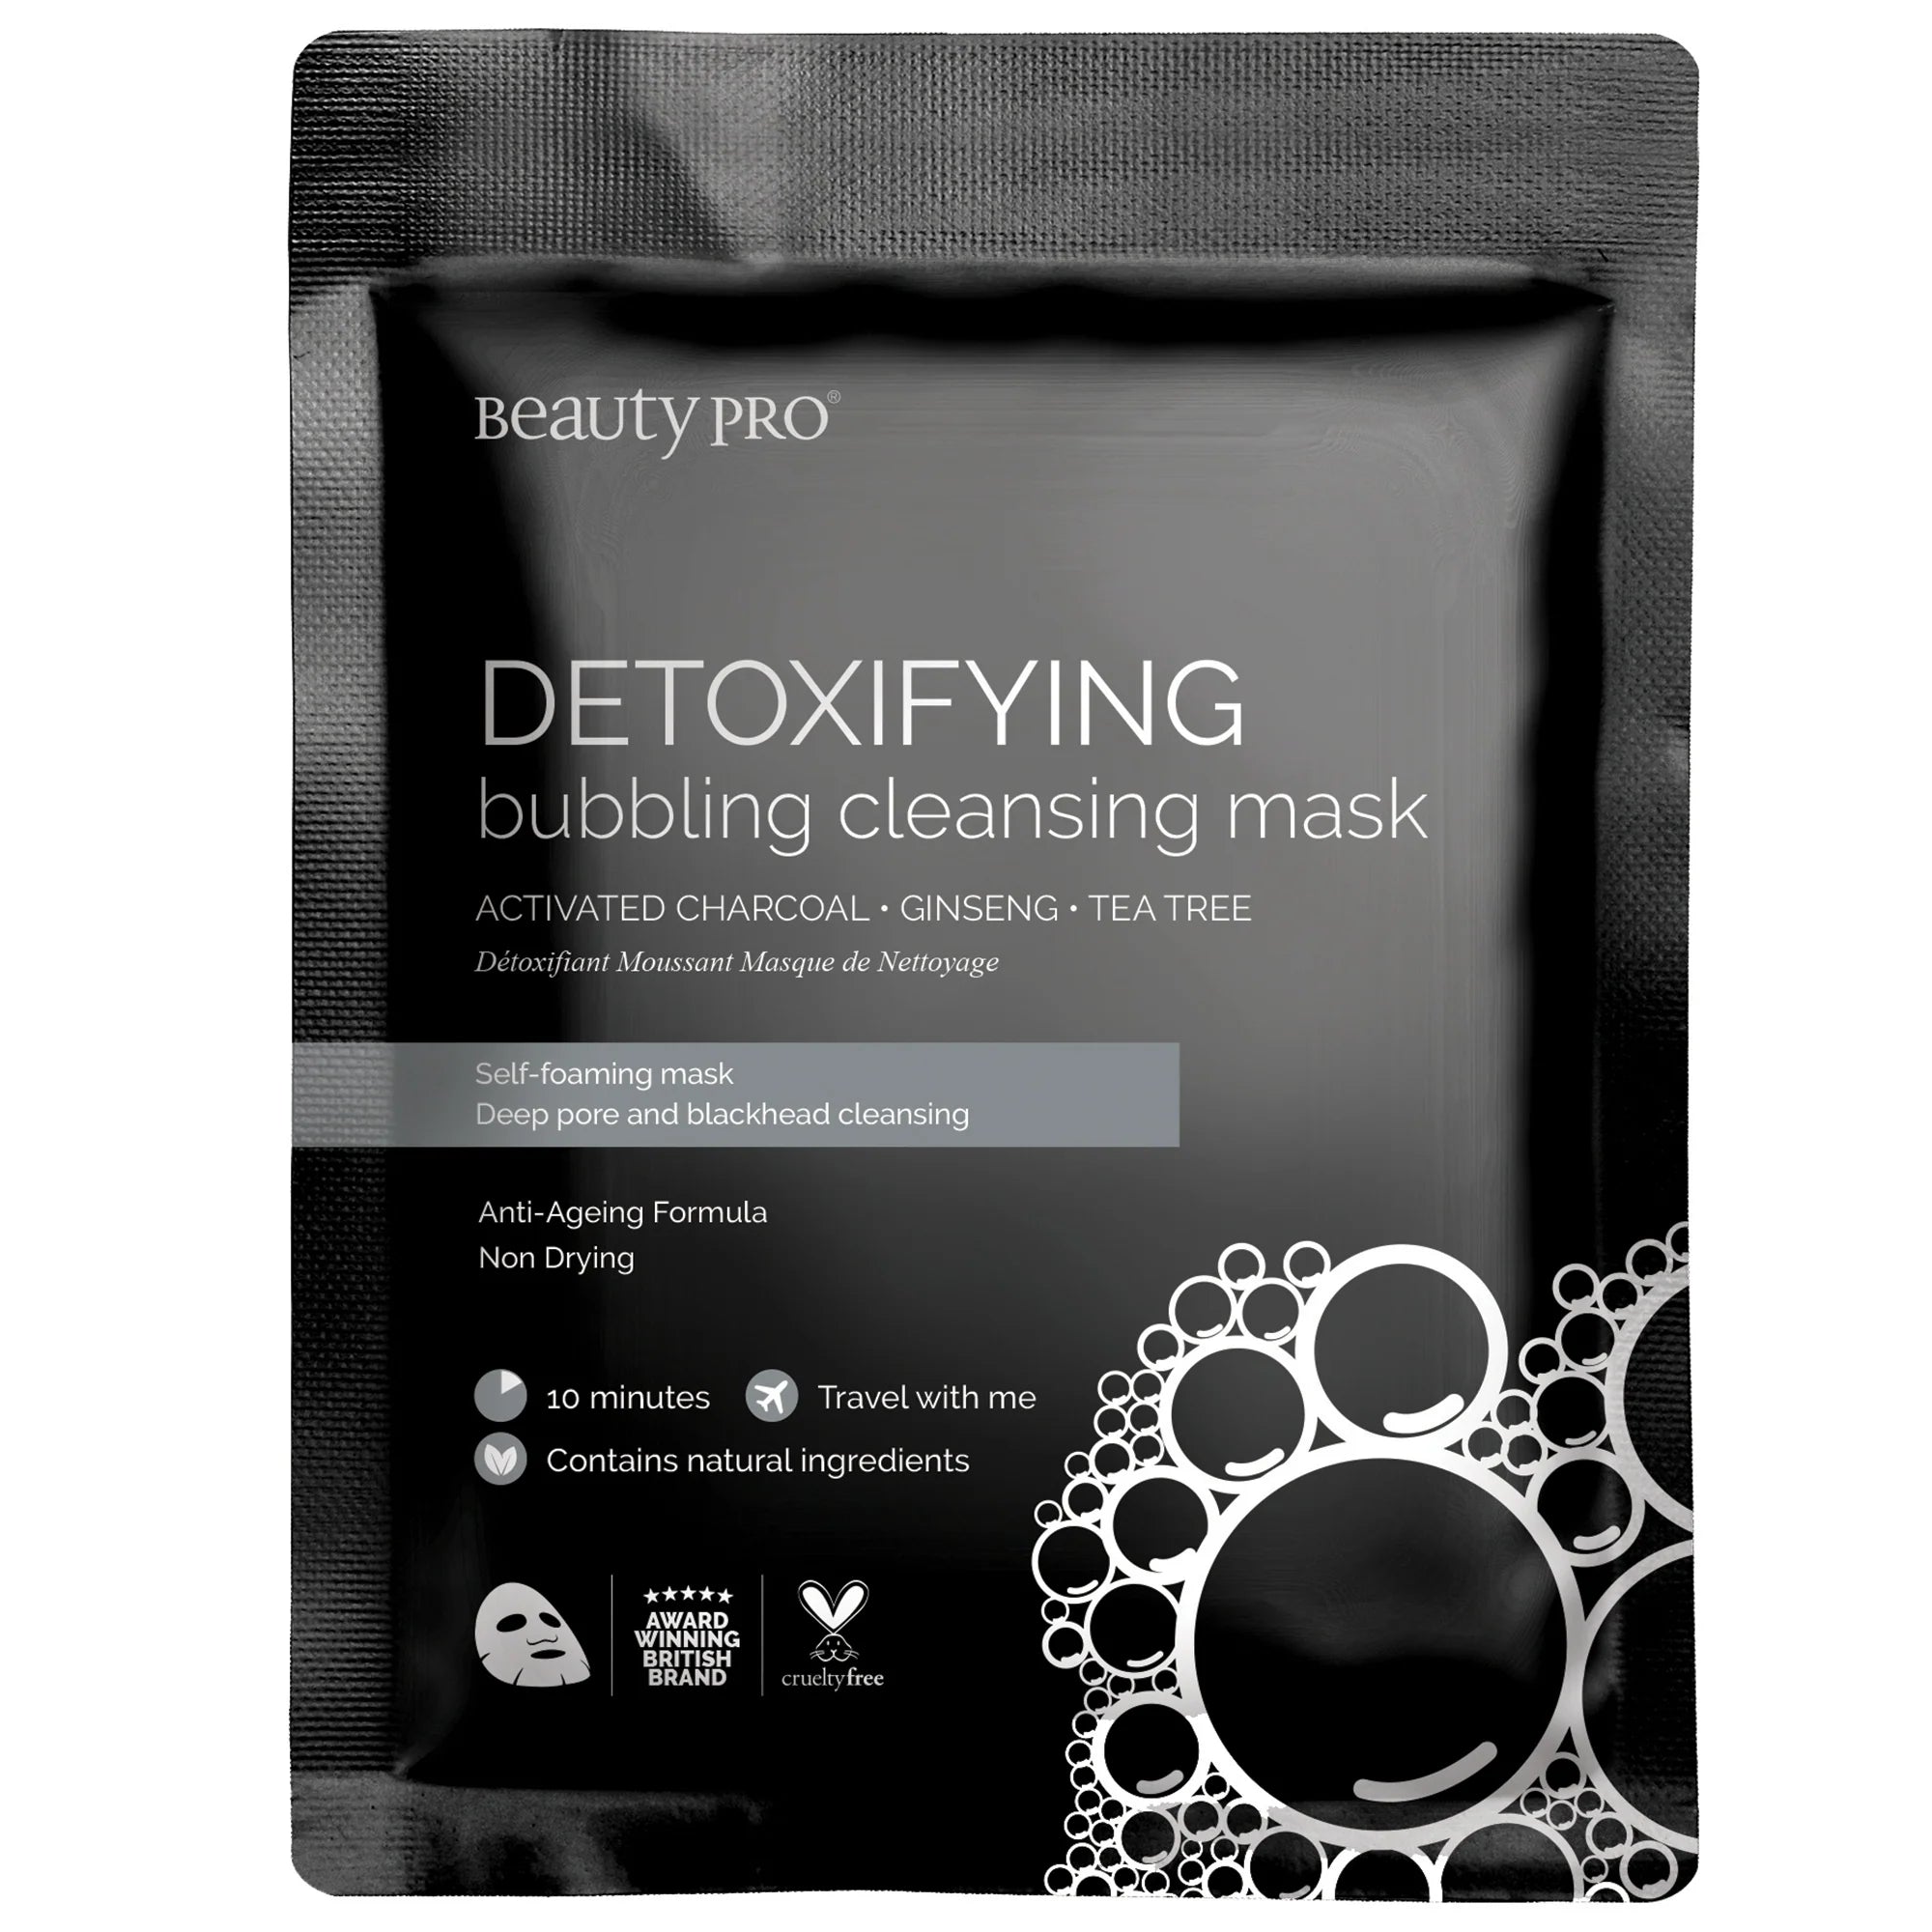 DETOXIFYING Bubbling Cleansing Sheet Mask with Activated Charcoal 1 pcs